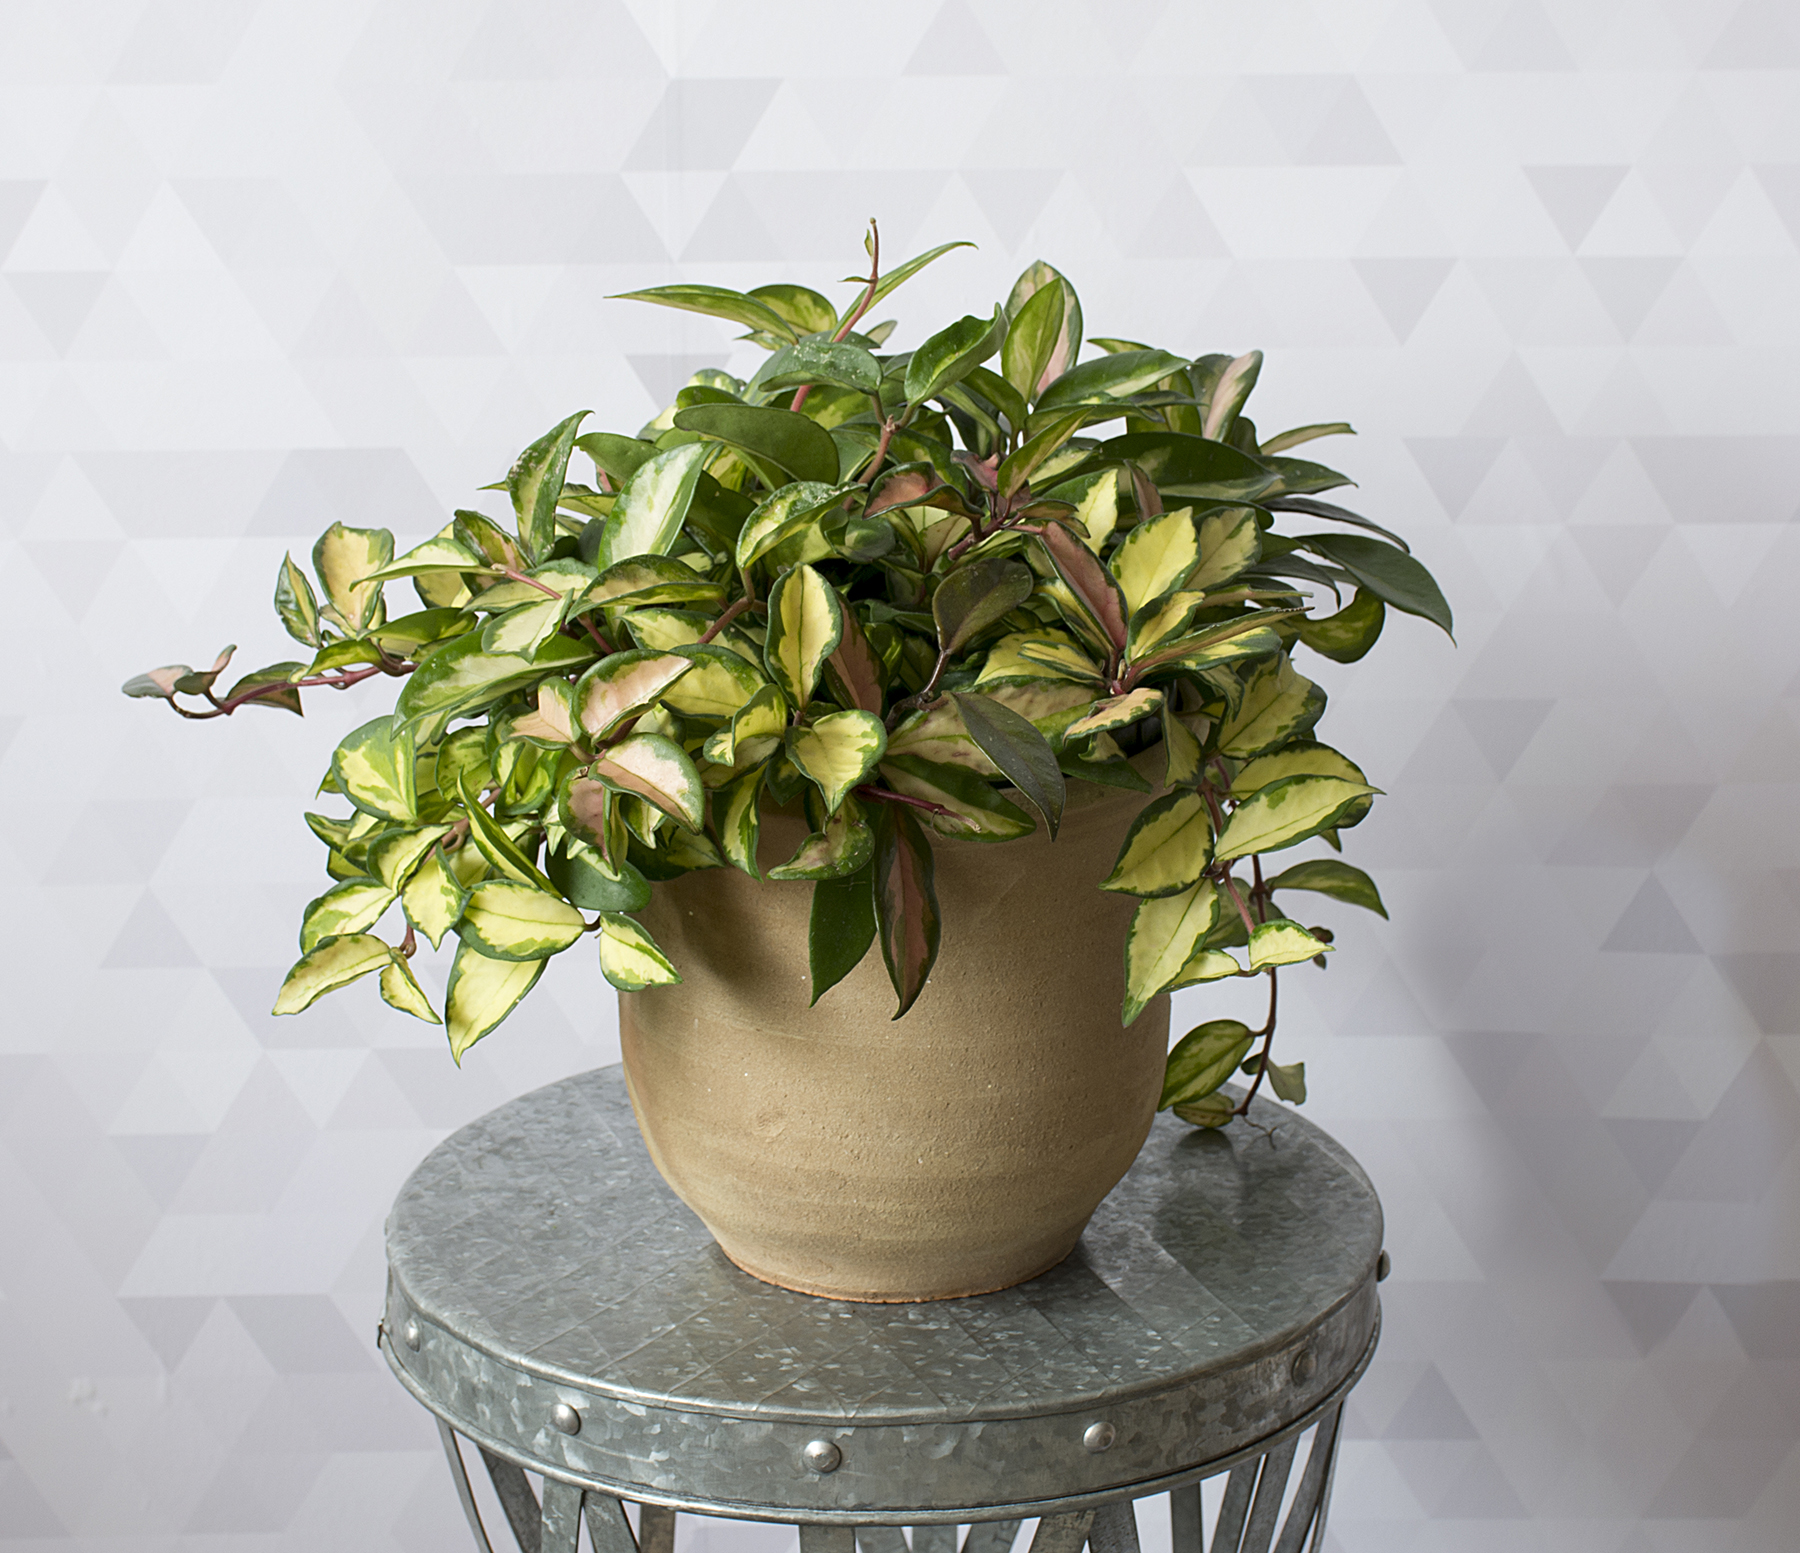 14 Hardy Houseplants That Will Survive the Winter | Real Simple